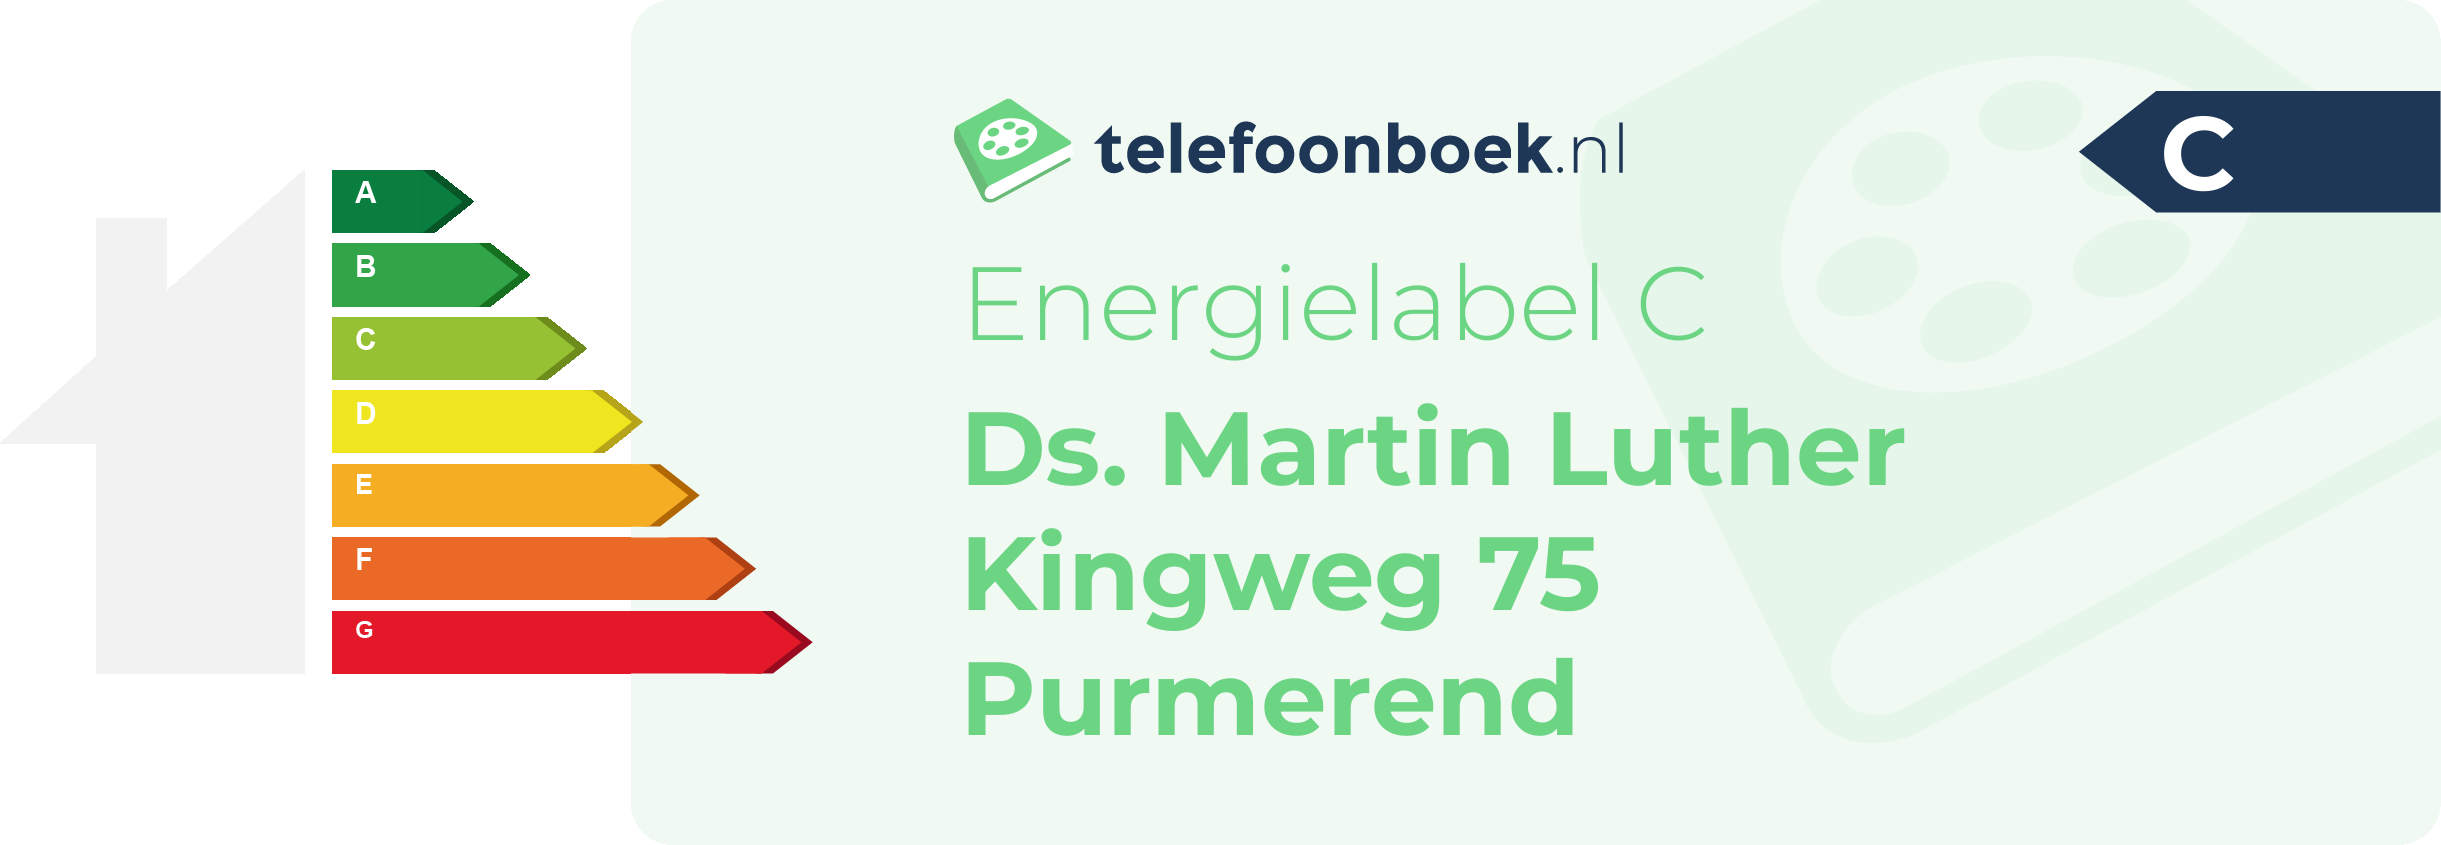 Energielabel Ds. Martin Luther Kingweg 75 Purmerend